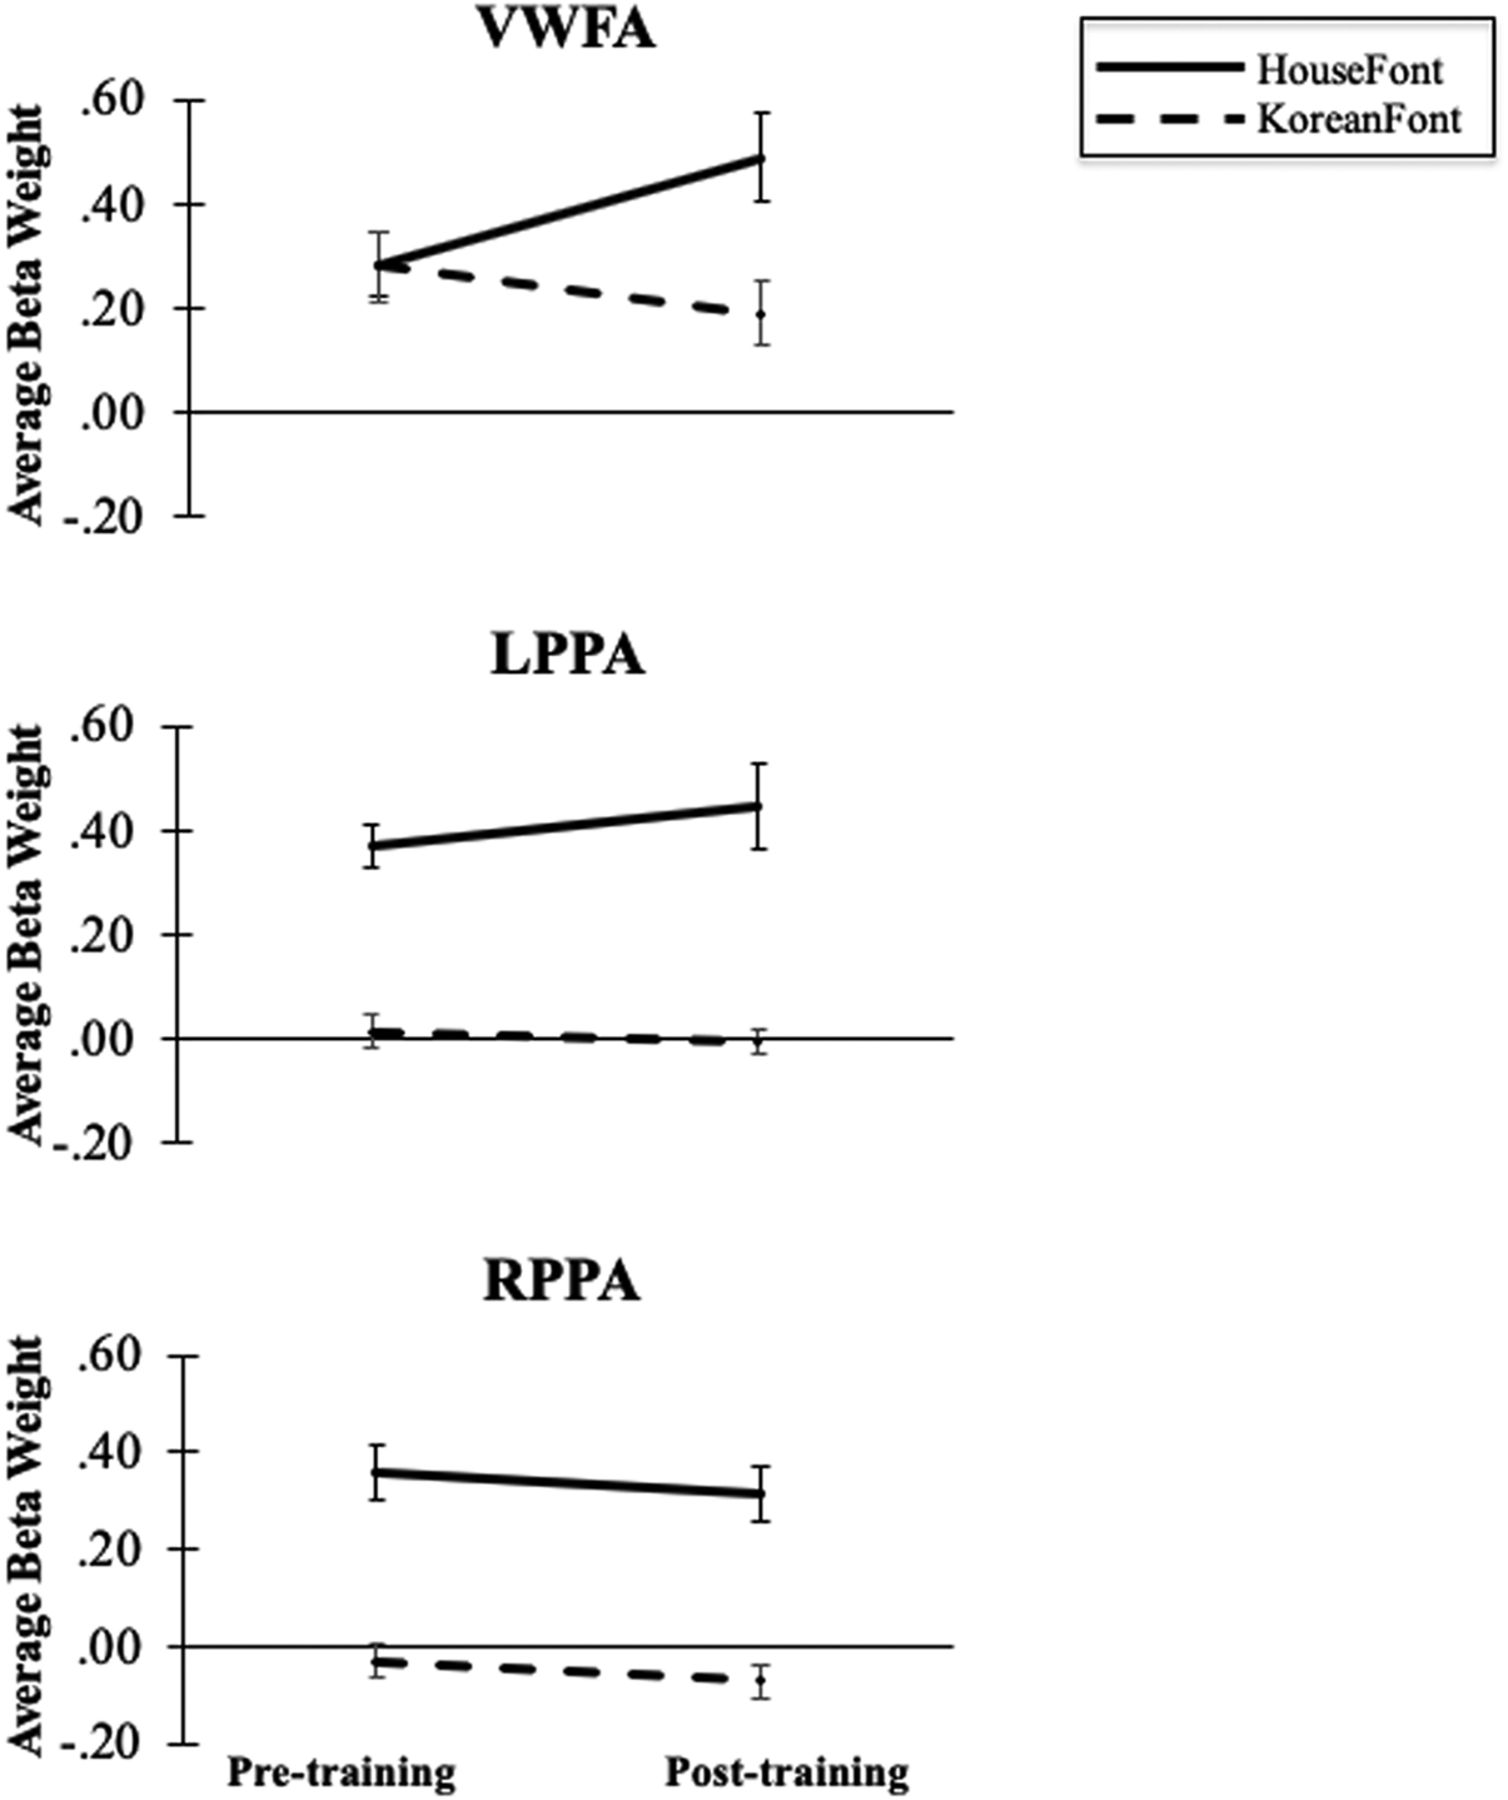 Figure 2. Pre- and post-training brain responses to HouseFont and KoreanFont. The VWFA showed no main effect for session or orthography, but there was a significant interaction of session and orthography. The left and right PPA (LPPA and RPPA) showed the expected significant main effect of orthography, no main effect of training, and no significant interaction between session and orthography. Data represent average estimated brain response and the standard error. (Adapted from Figure 4 in Martin et al., 2019.) 